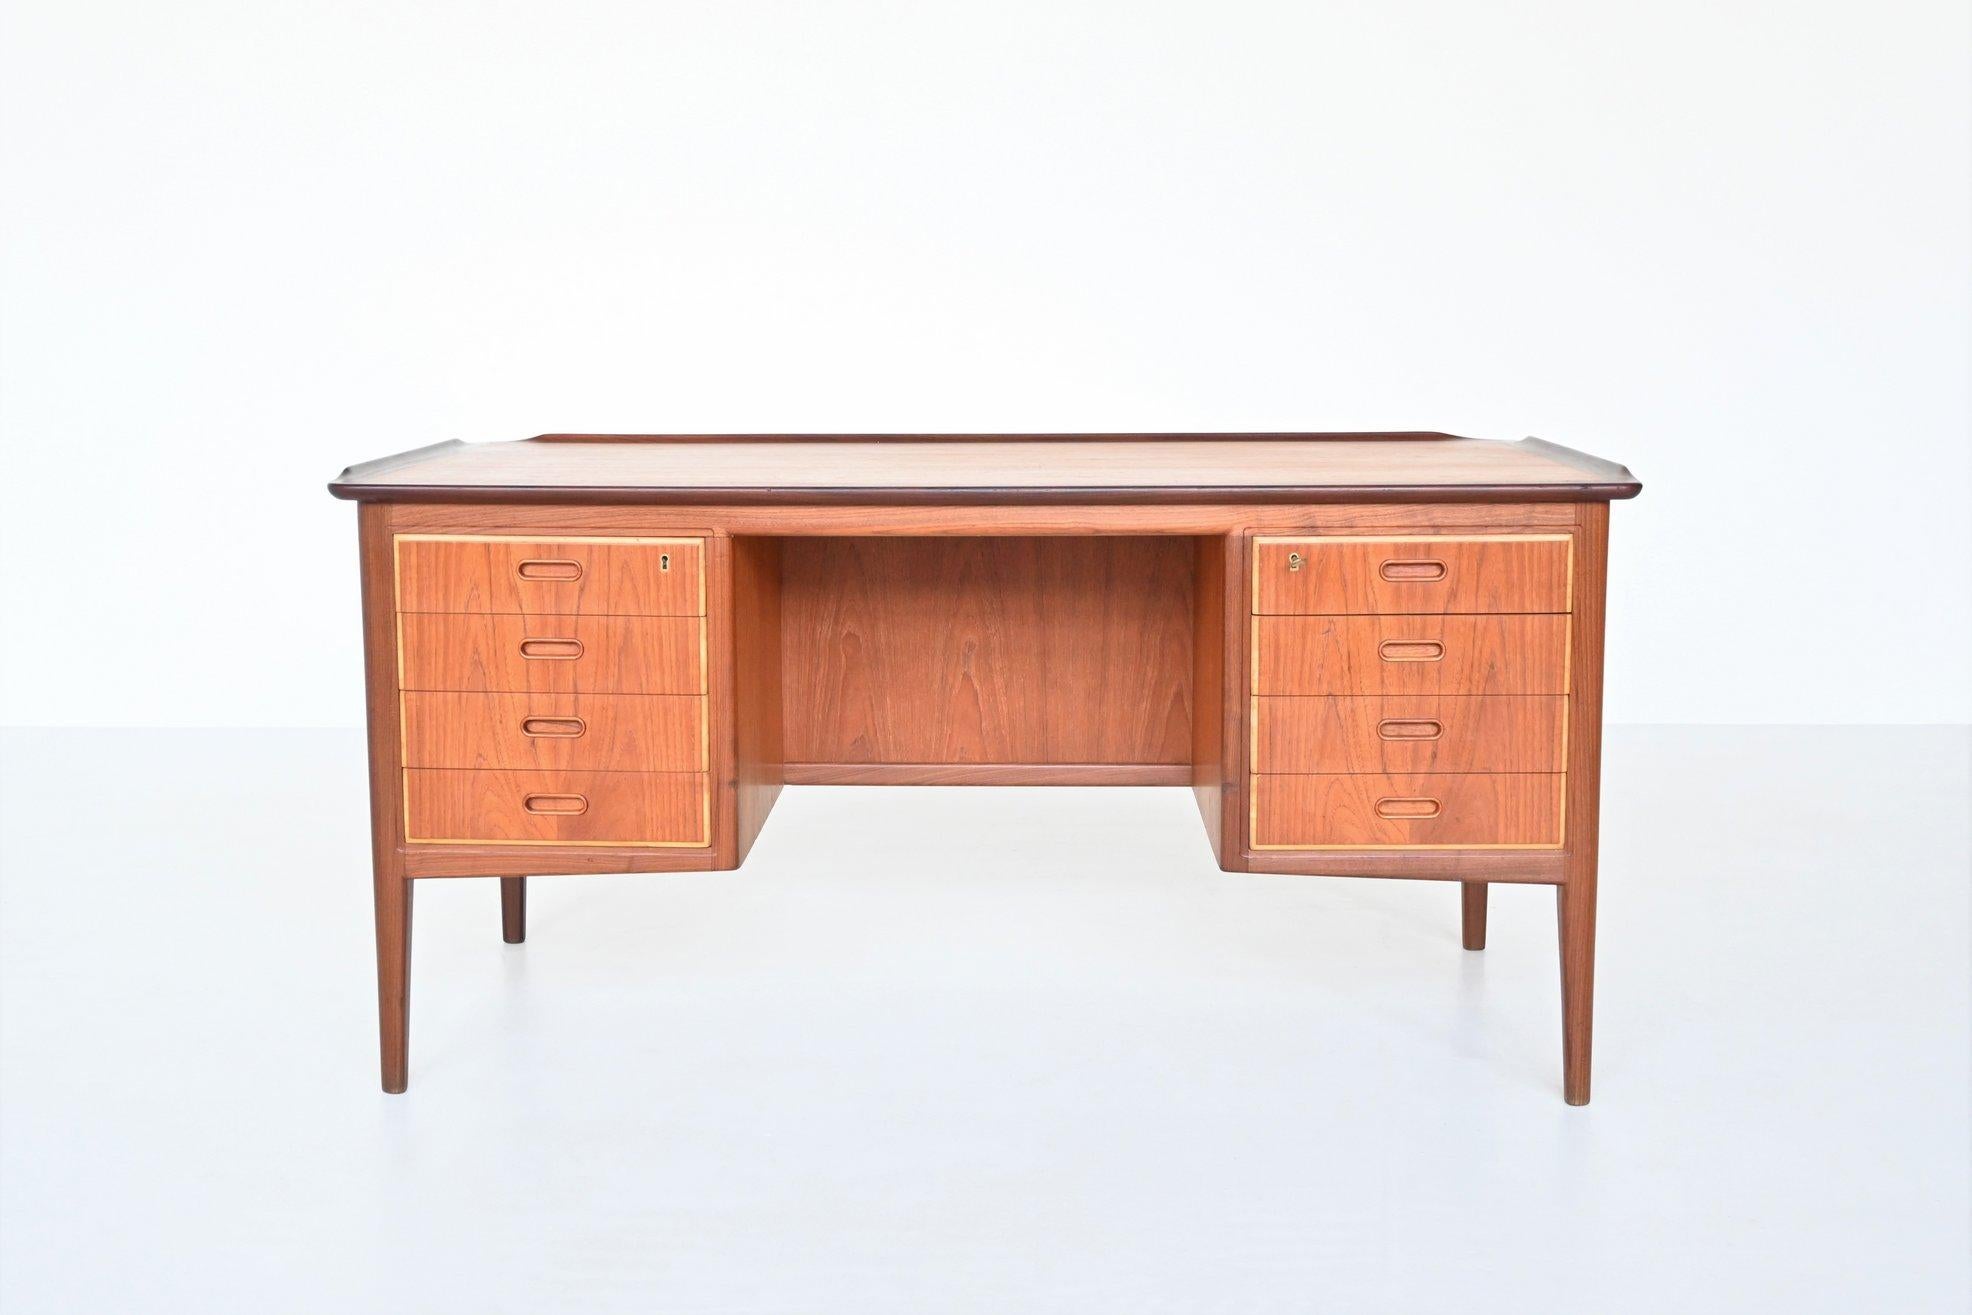 Gorgeous large desk designed by Svend Aage Madsen and manufactured by HP Hansen, Denmark 1960. Along with Hans Wegner, Arne Jacobsen and Børge Mogensen, Svend Aage Madsen was one of the great masters of Danish design of the mid-century. This